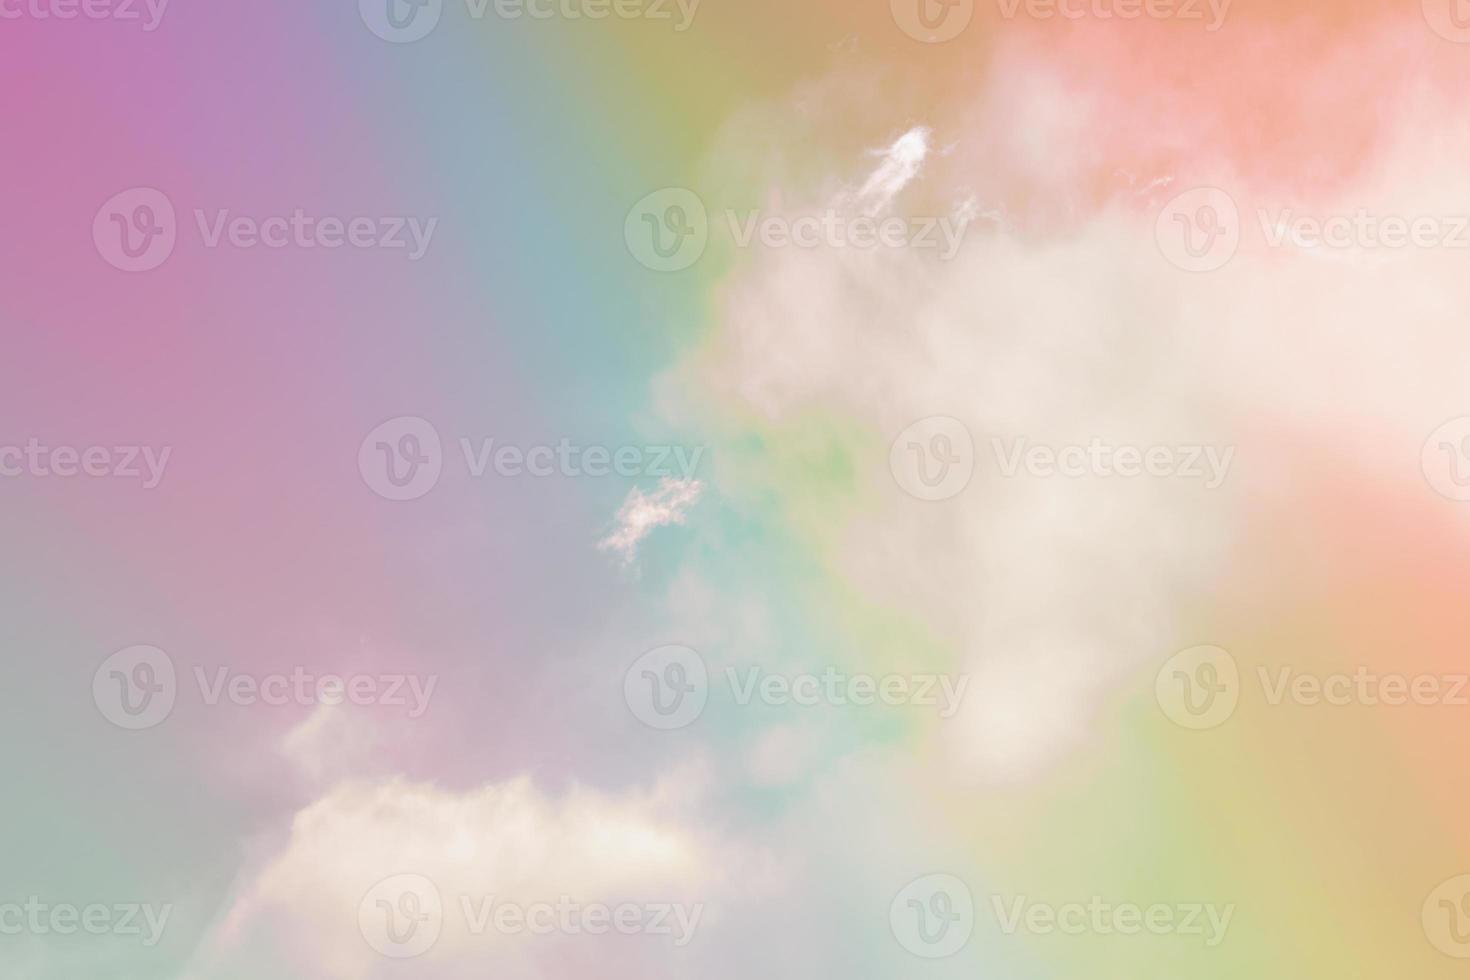 beauty sweet pastel yellow pink colorful with fluffy clouds on sky. multi color rainbow image. abstract fantasy growing light photo